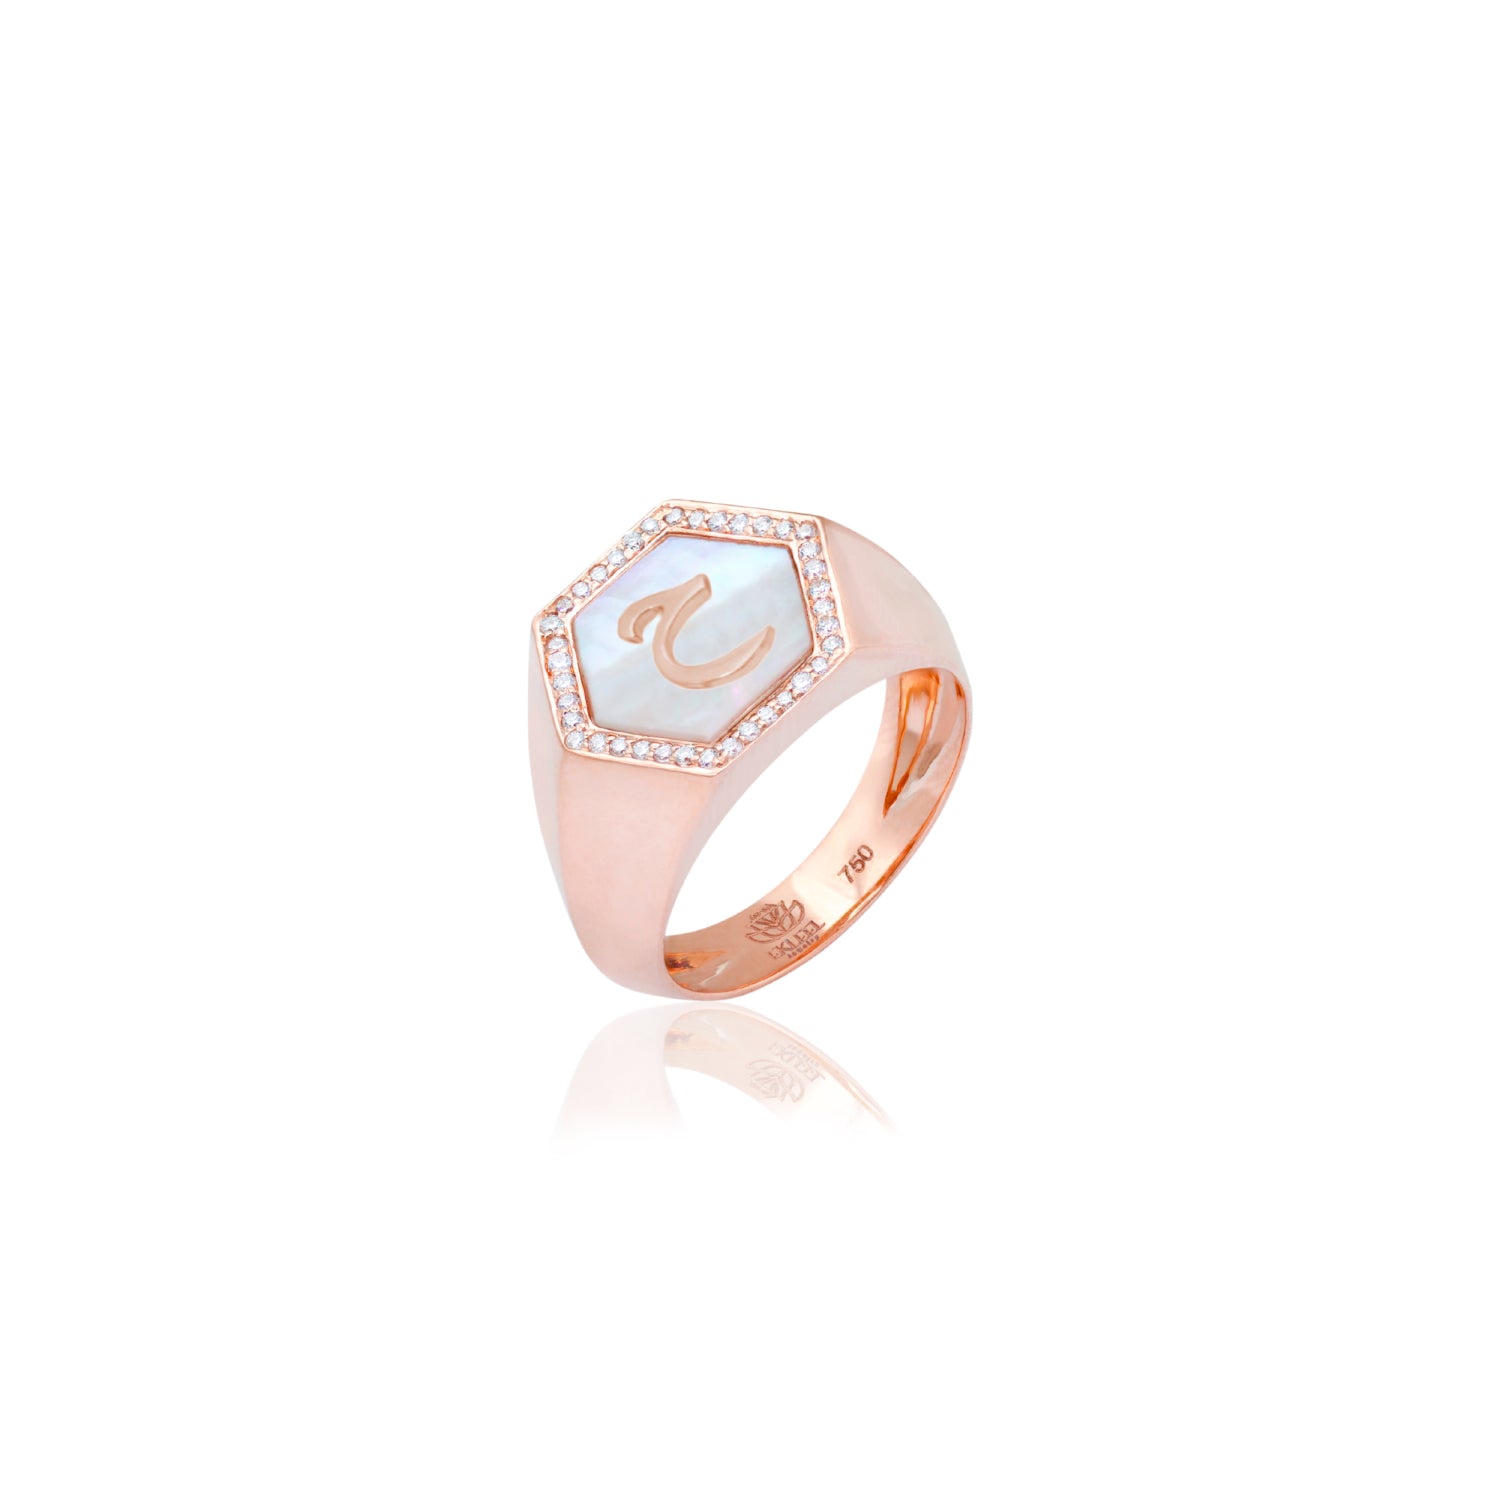 Qamoos 2.0 Letter ح White Mother of Pearl and Diamond Signet Ring in Rose Gold